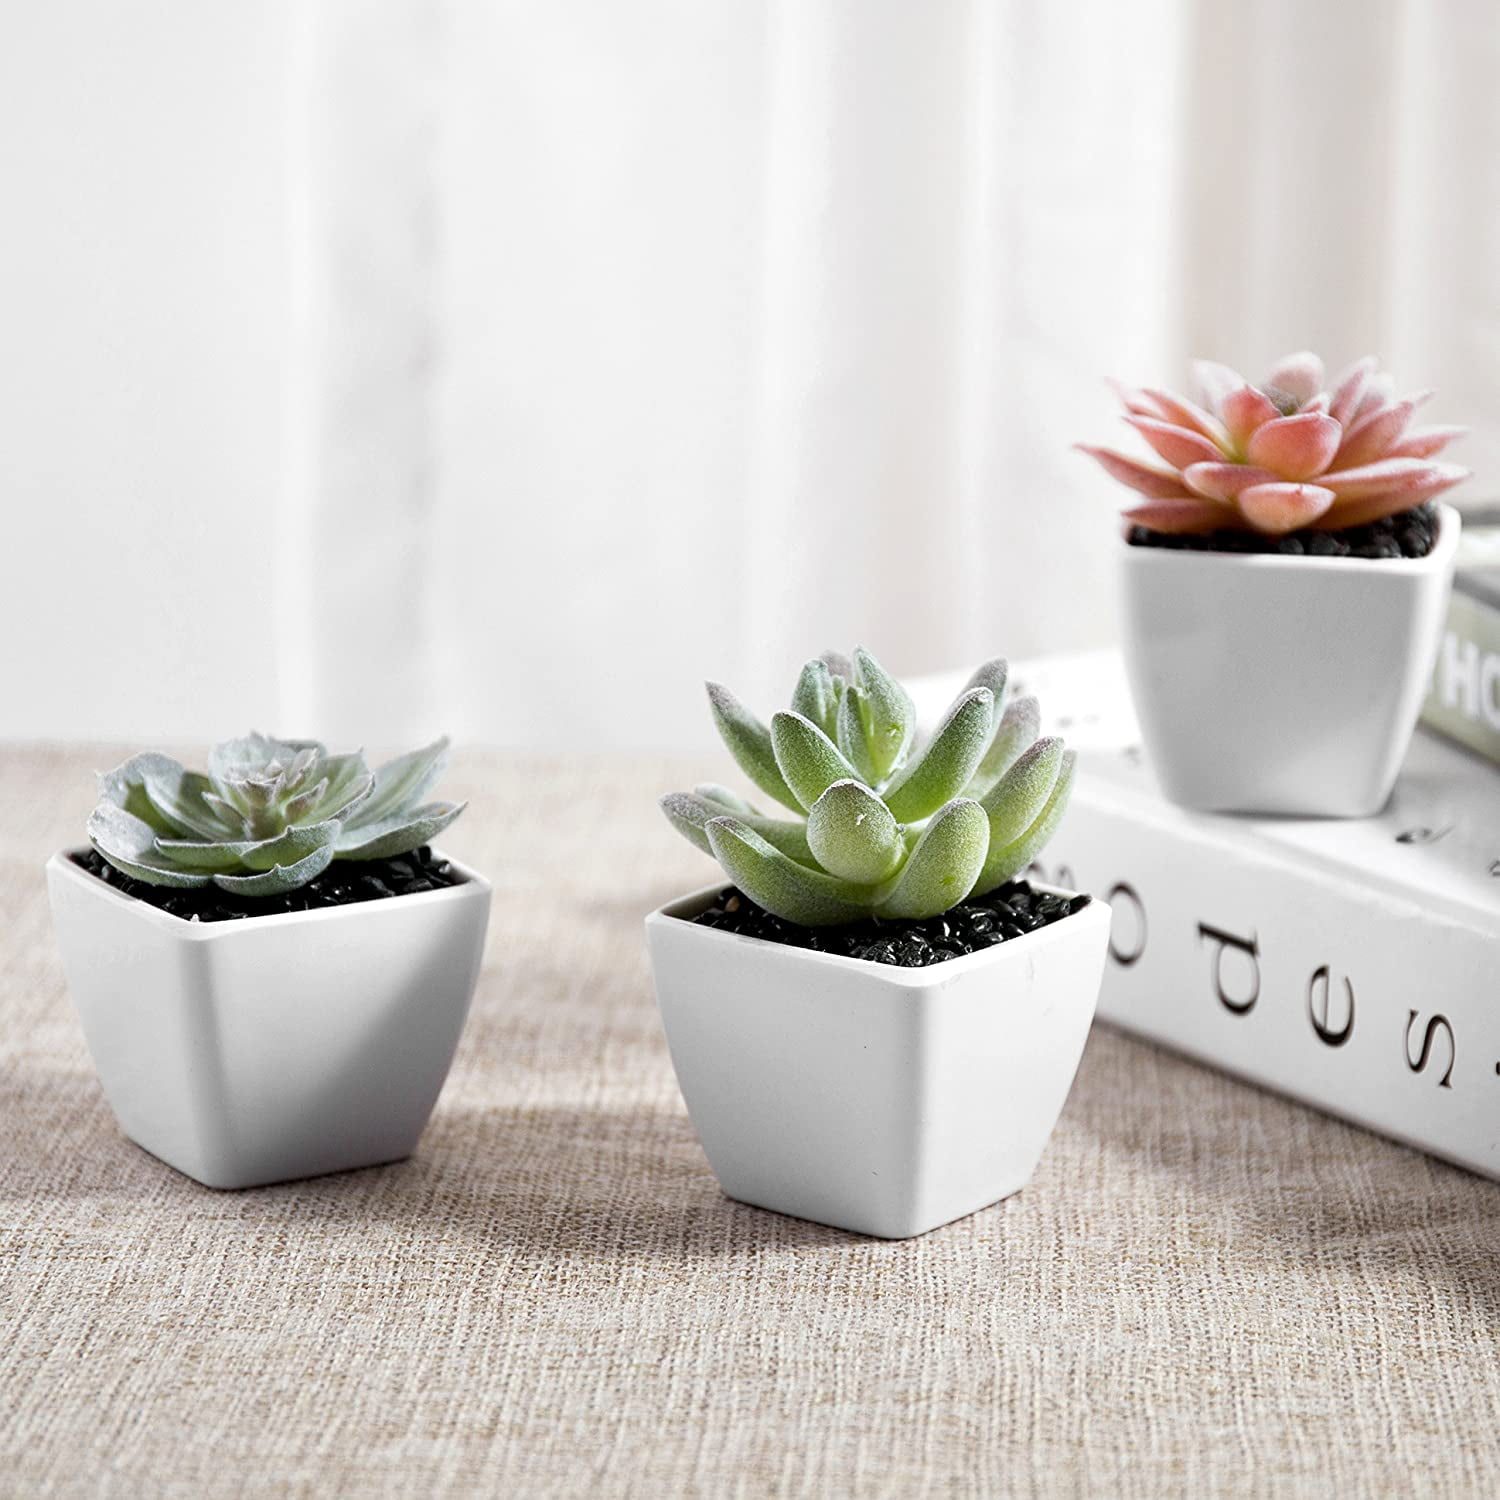 MyGift Set of 3 Faux Succulent Plants in White Ceramic Pots with Bamboo Trays 